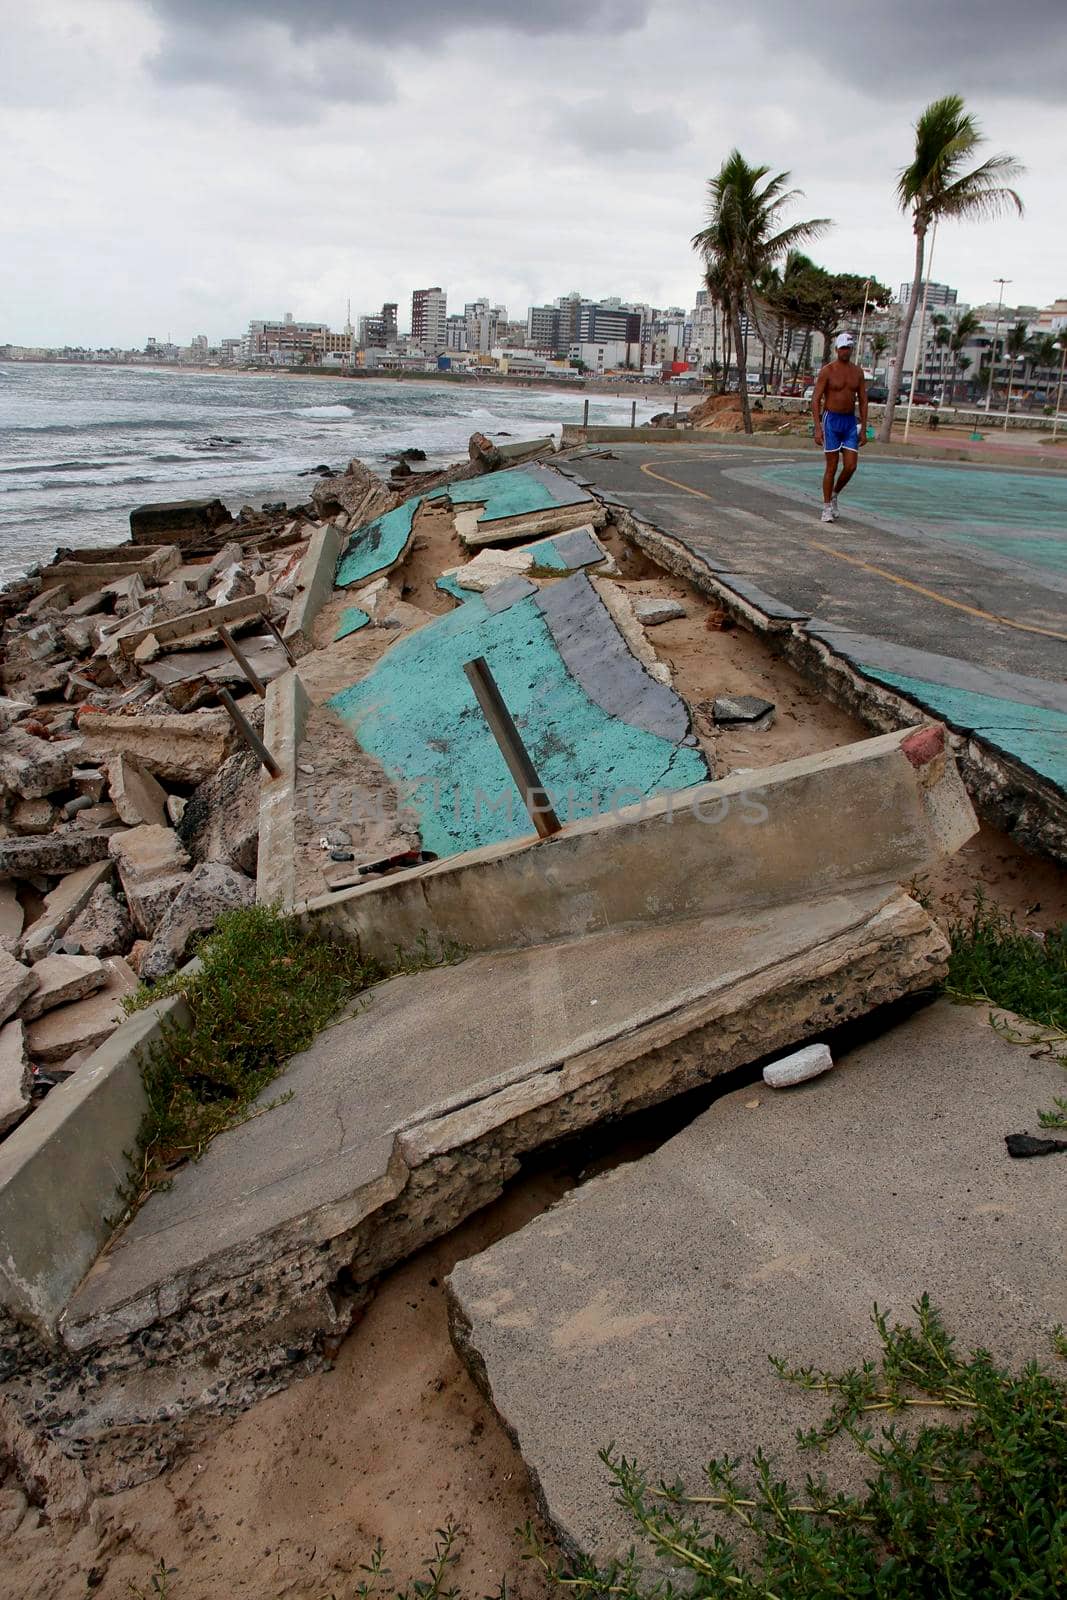 salvador, bahia / brazil - april 17, 2013: destruction caused by the force of the tide of the square by the sea in the neighborhood of Pituba in the city of Salvador.


